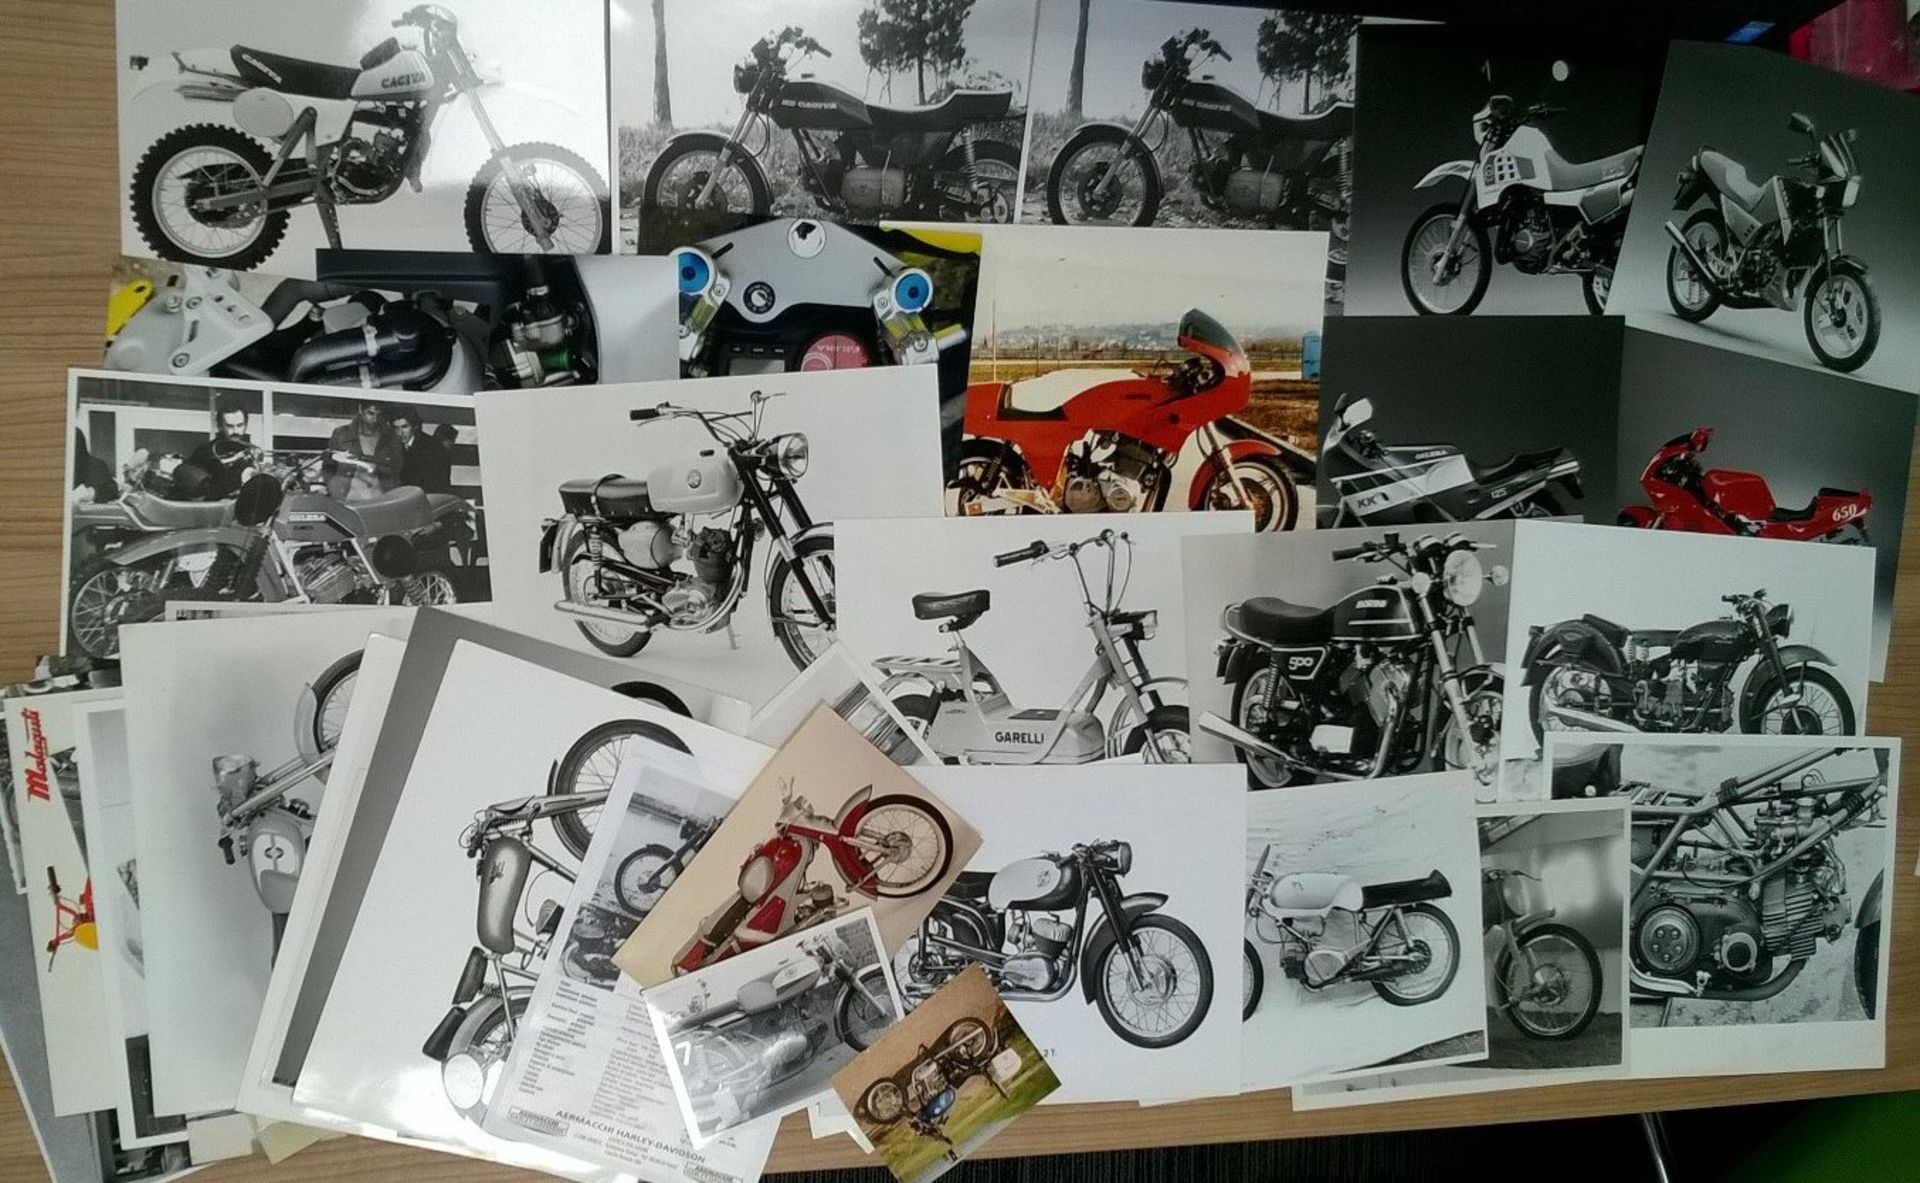 Italian motorcycle photos including factory images depicting machines 1940s - 1990s, Gilera,